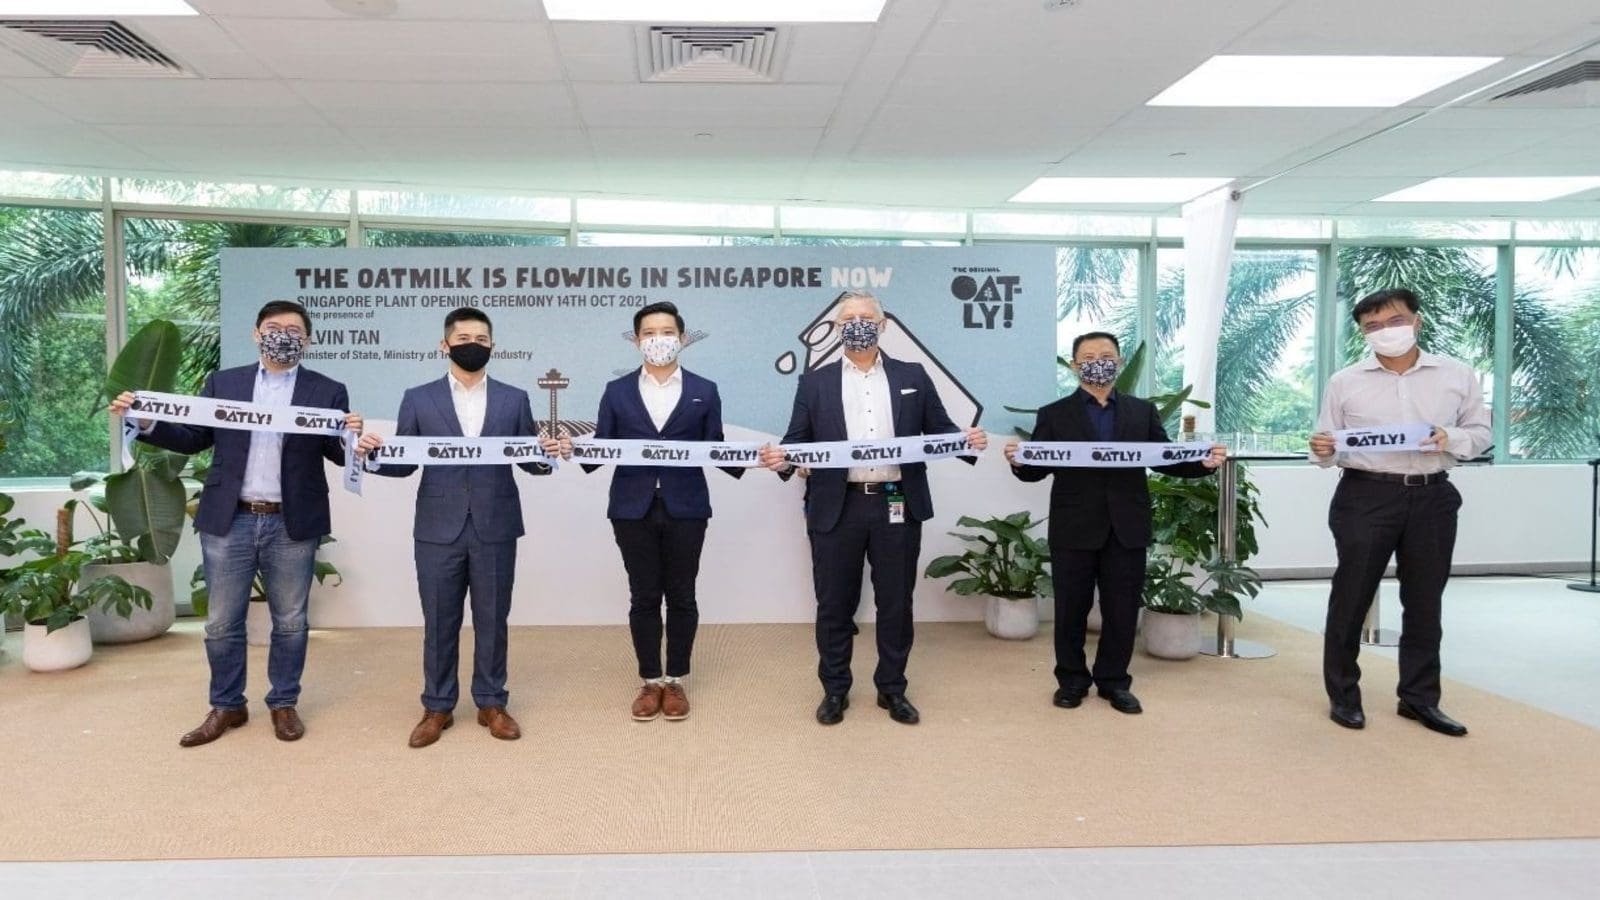 Oatly expands presence in Asia with launch of new oat milk facility in Singapore